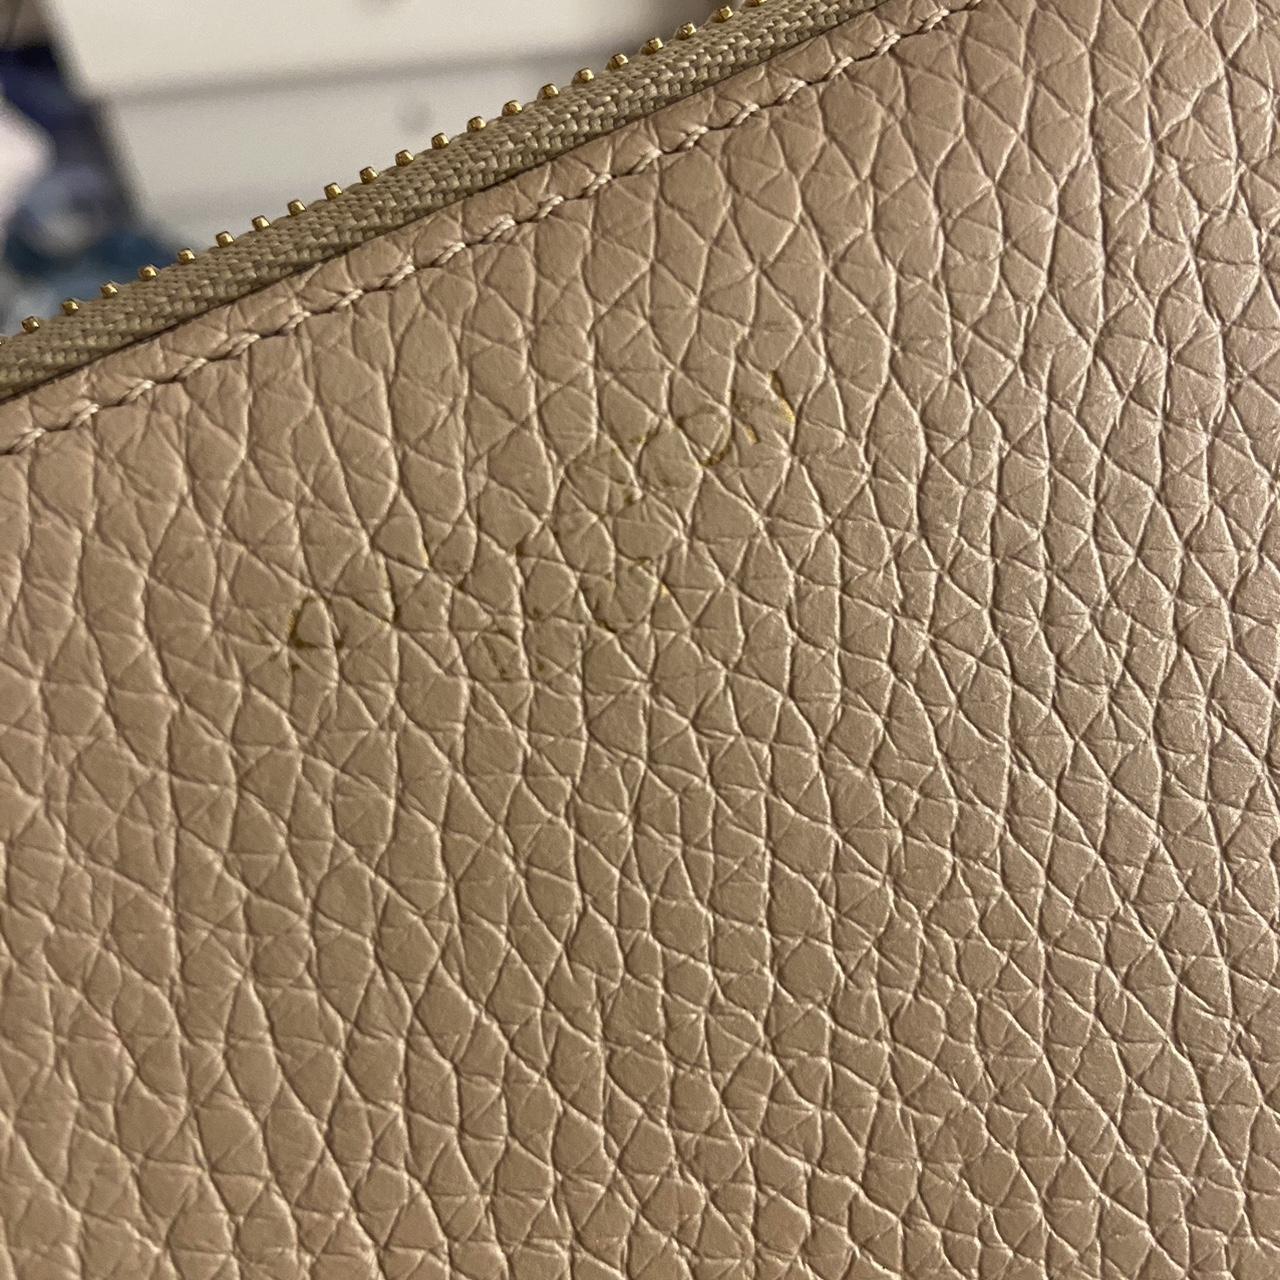 Louis Vuitton wallet Don't know the exact name of - Depop